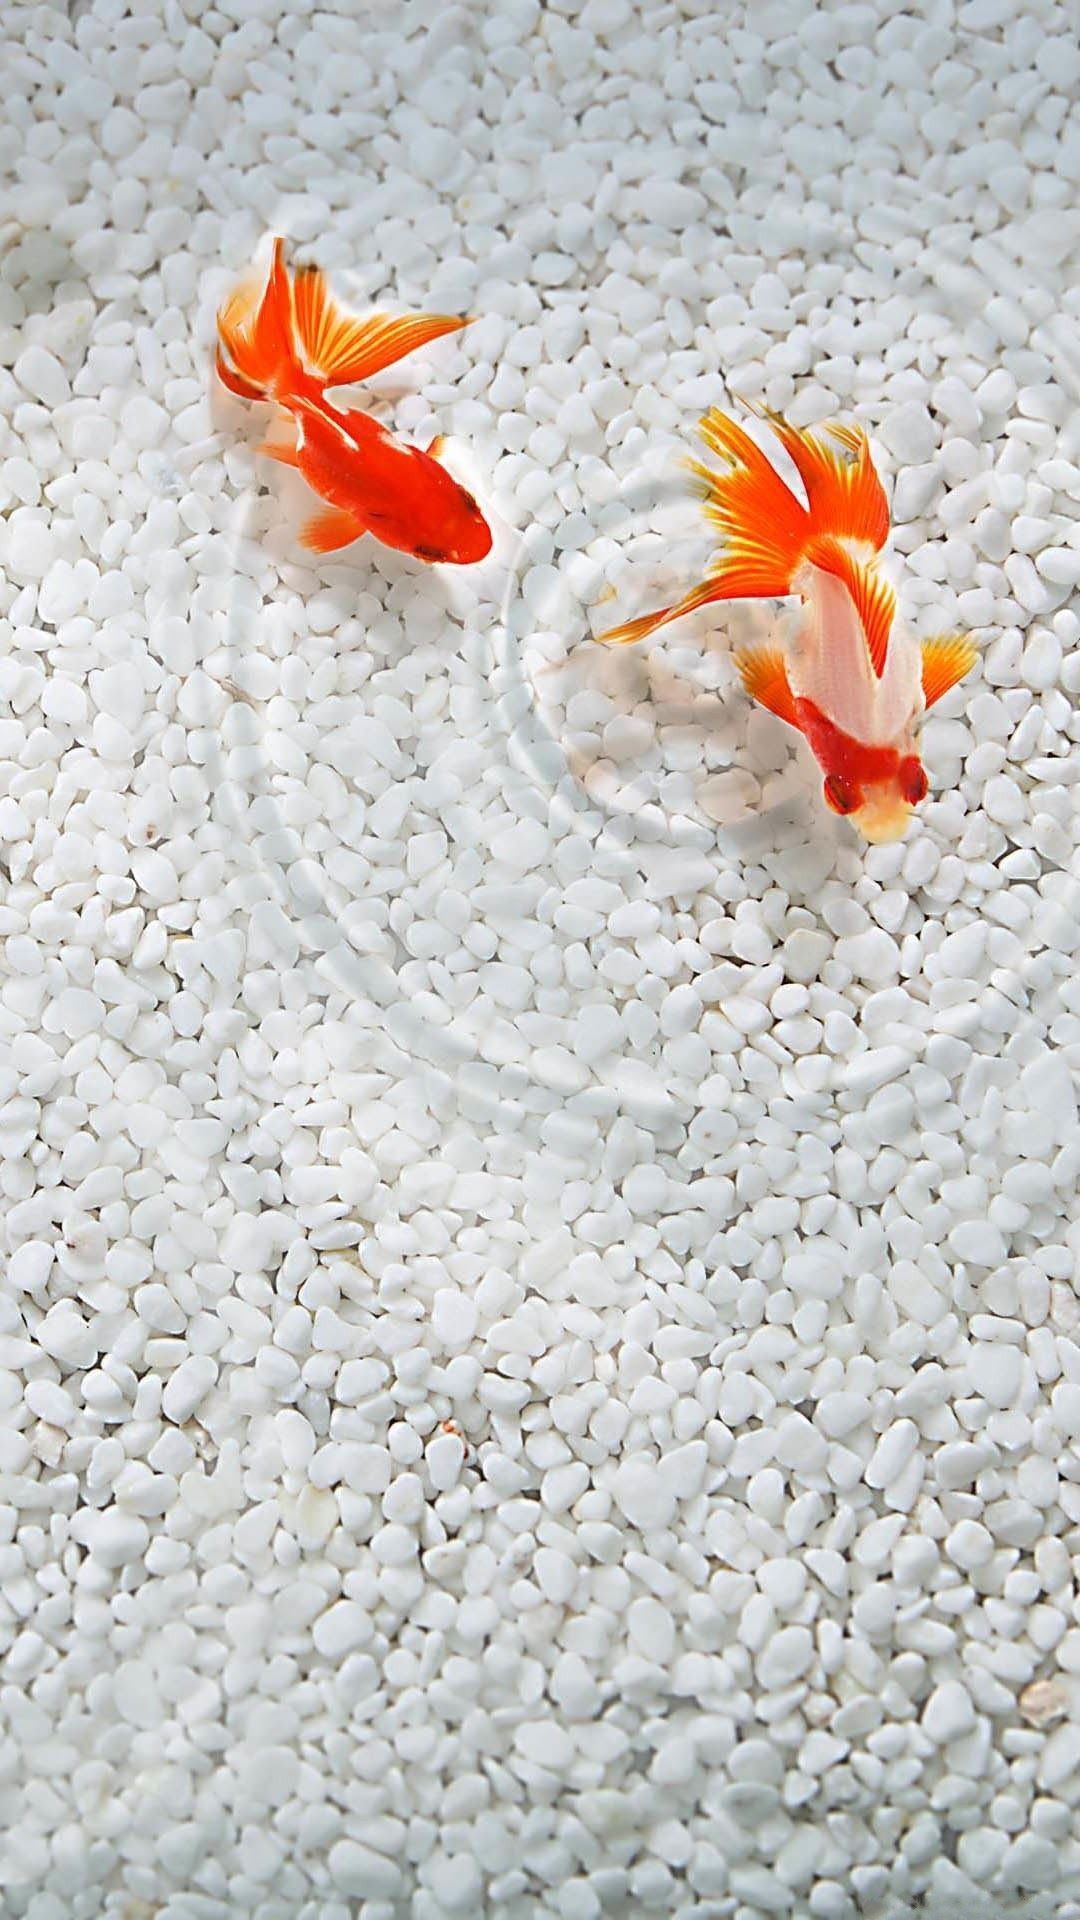 Cute Realistic Gold Fish iPhone Wallpaper. Tap to see more